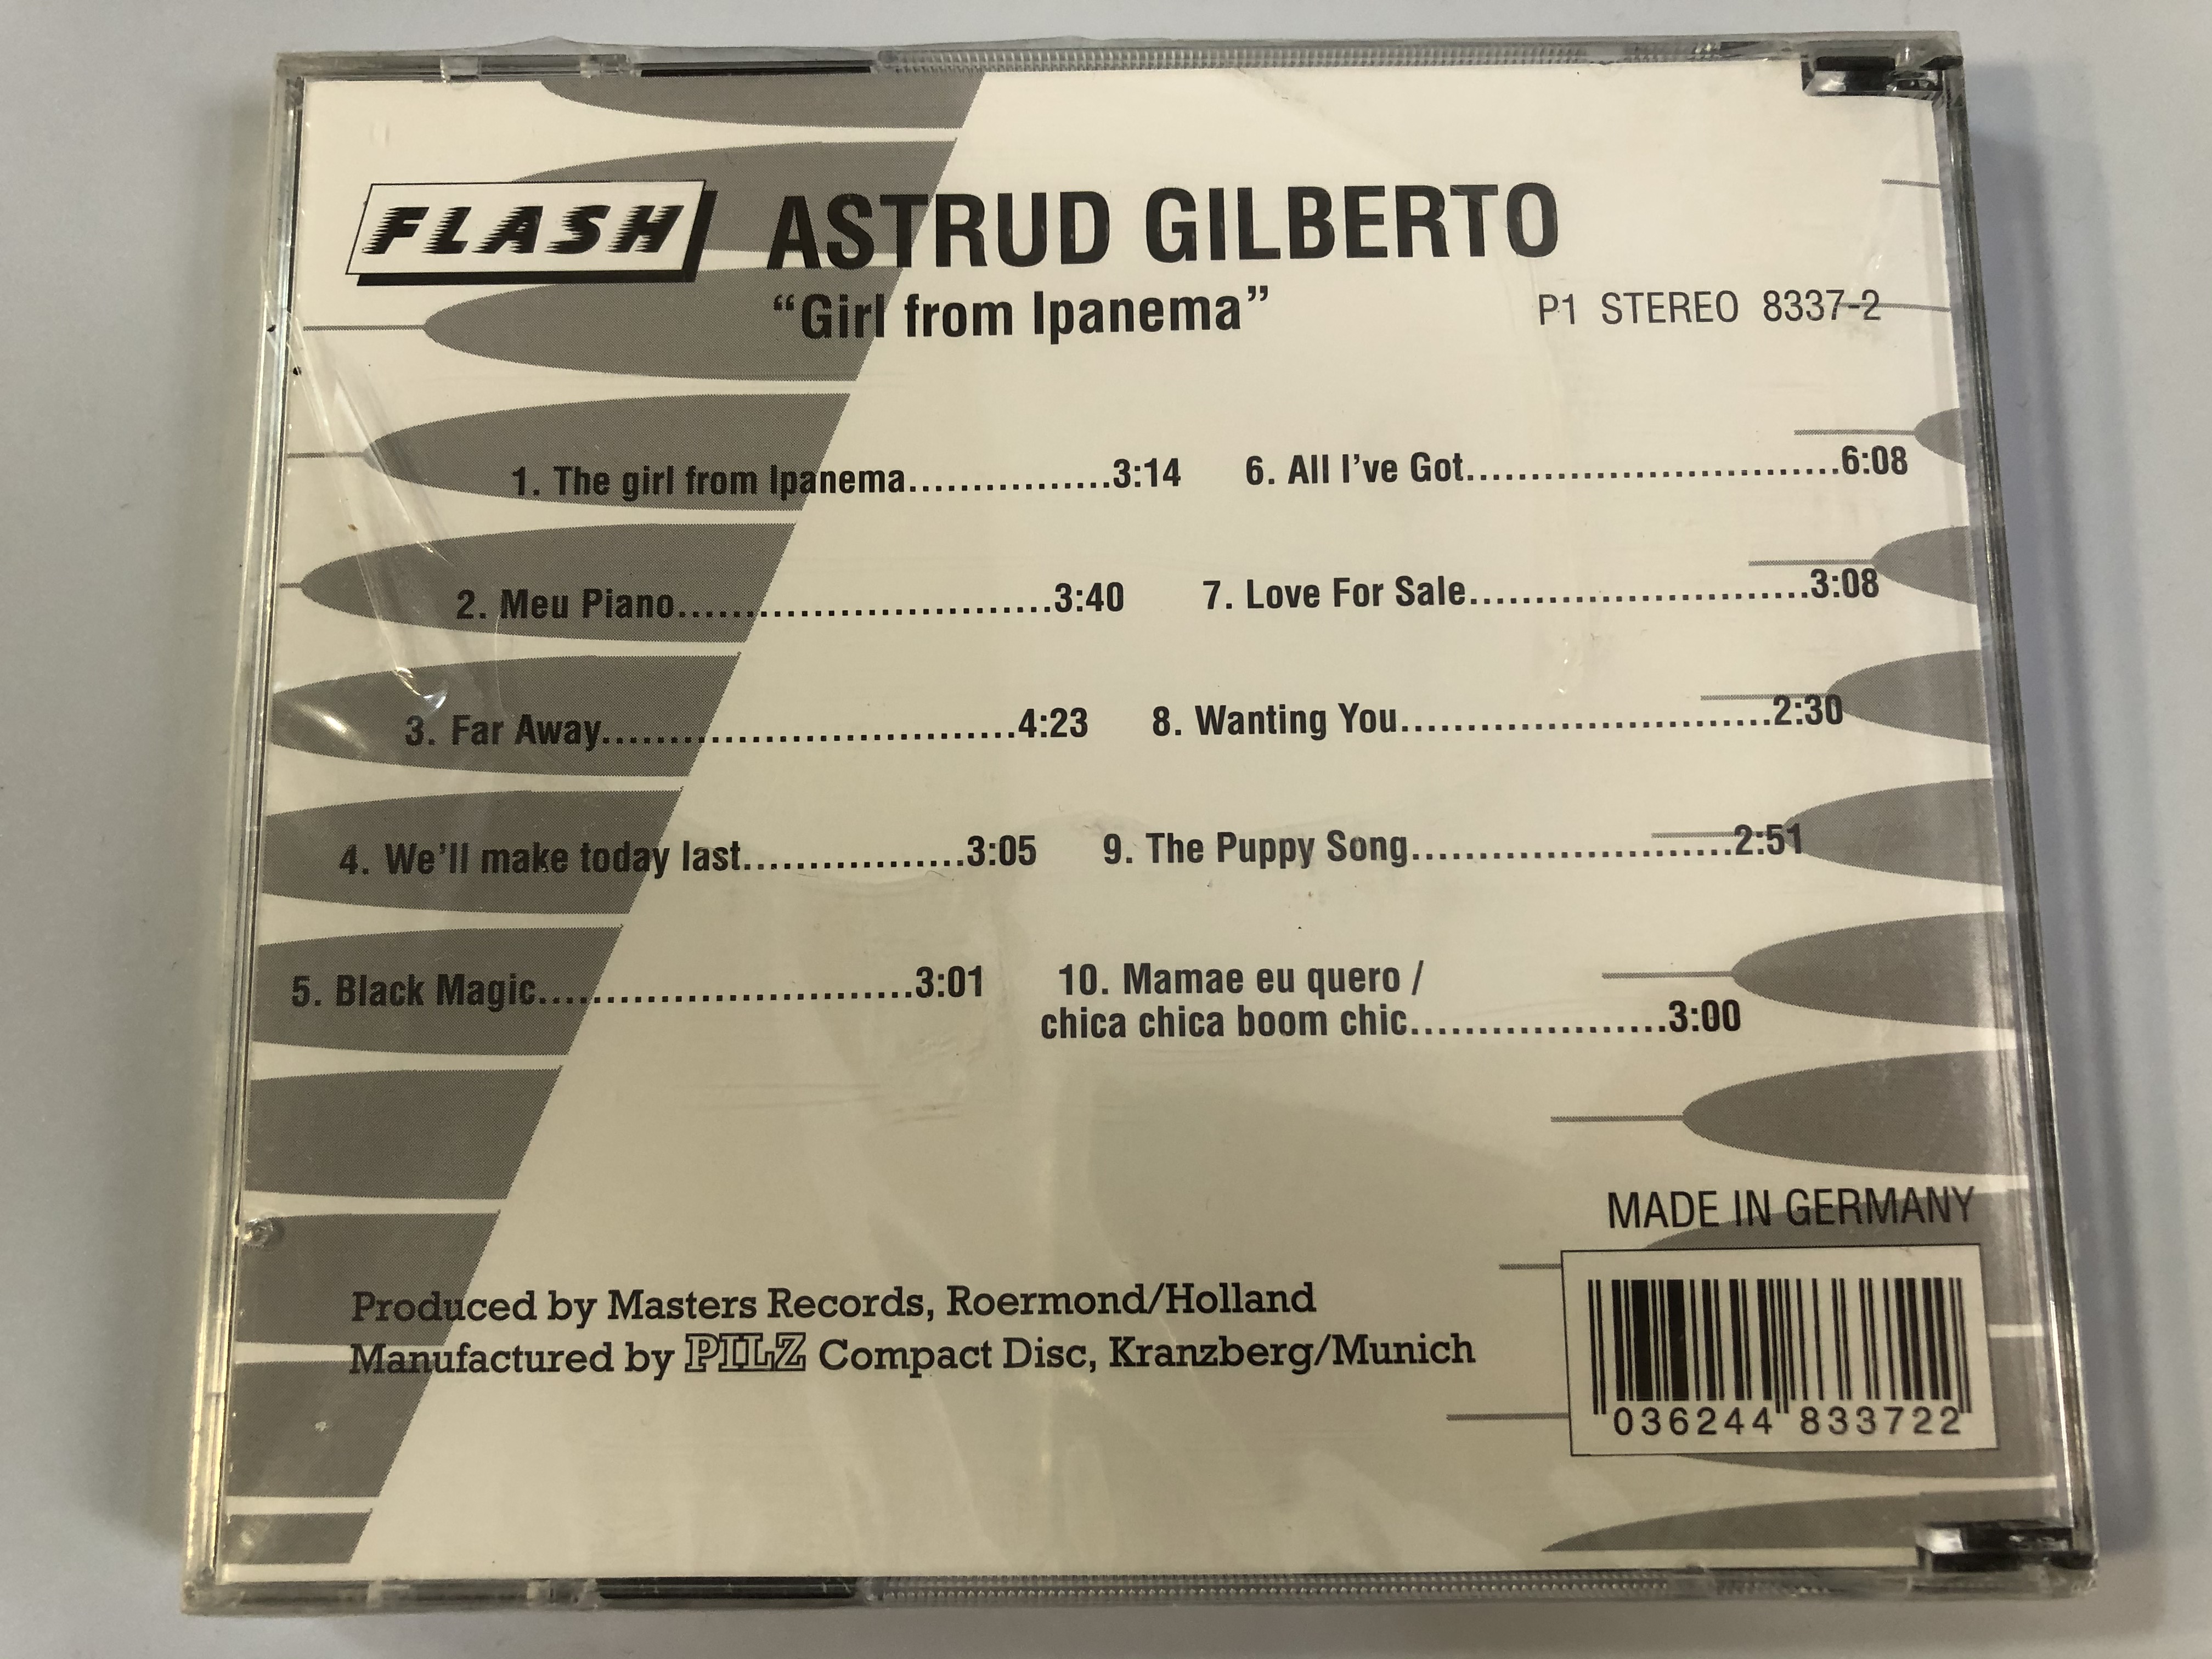 astrud-gilberto-girl-from-ipanema-black-magic-love-for-sale-the-girl-from-ipanema-and-others-flash-audio-cd-stereo-8337-2-2-.jpg